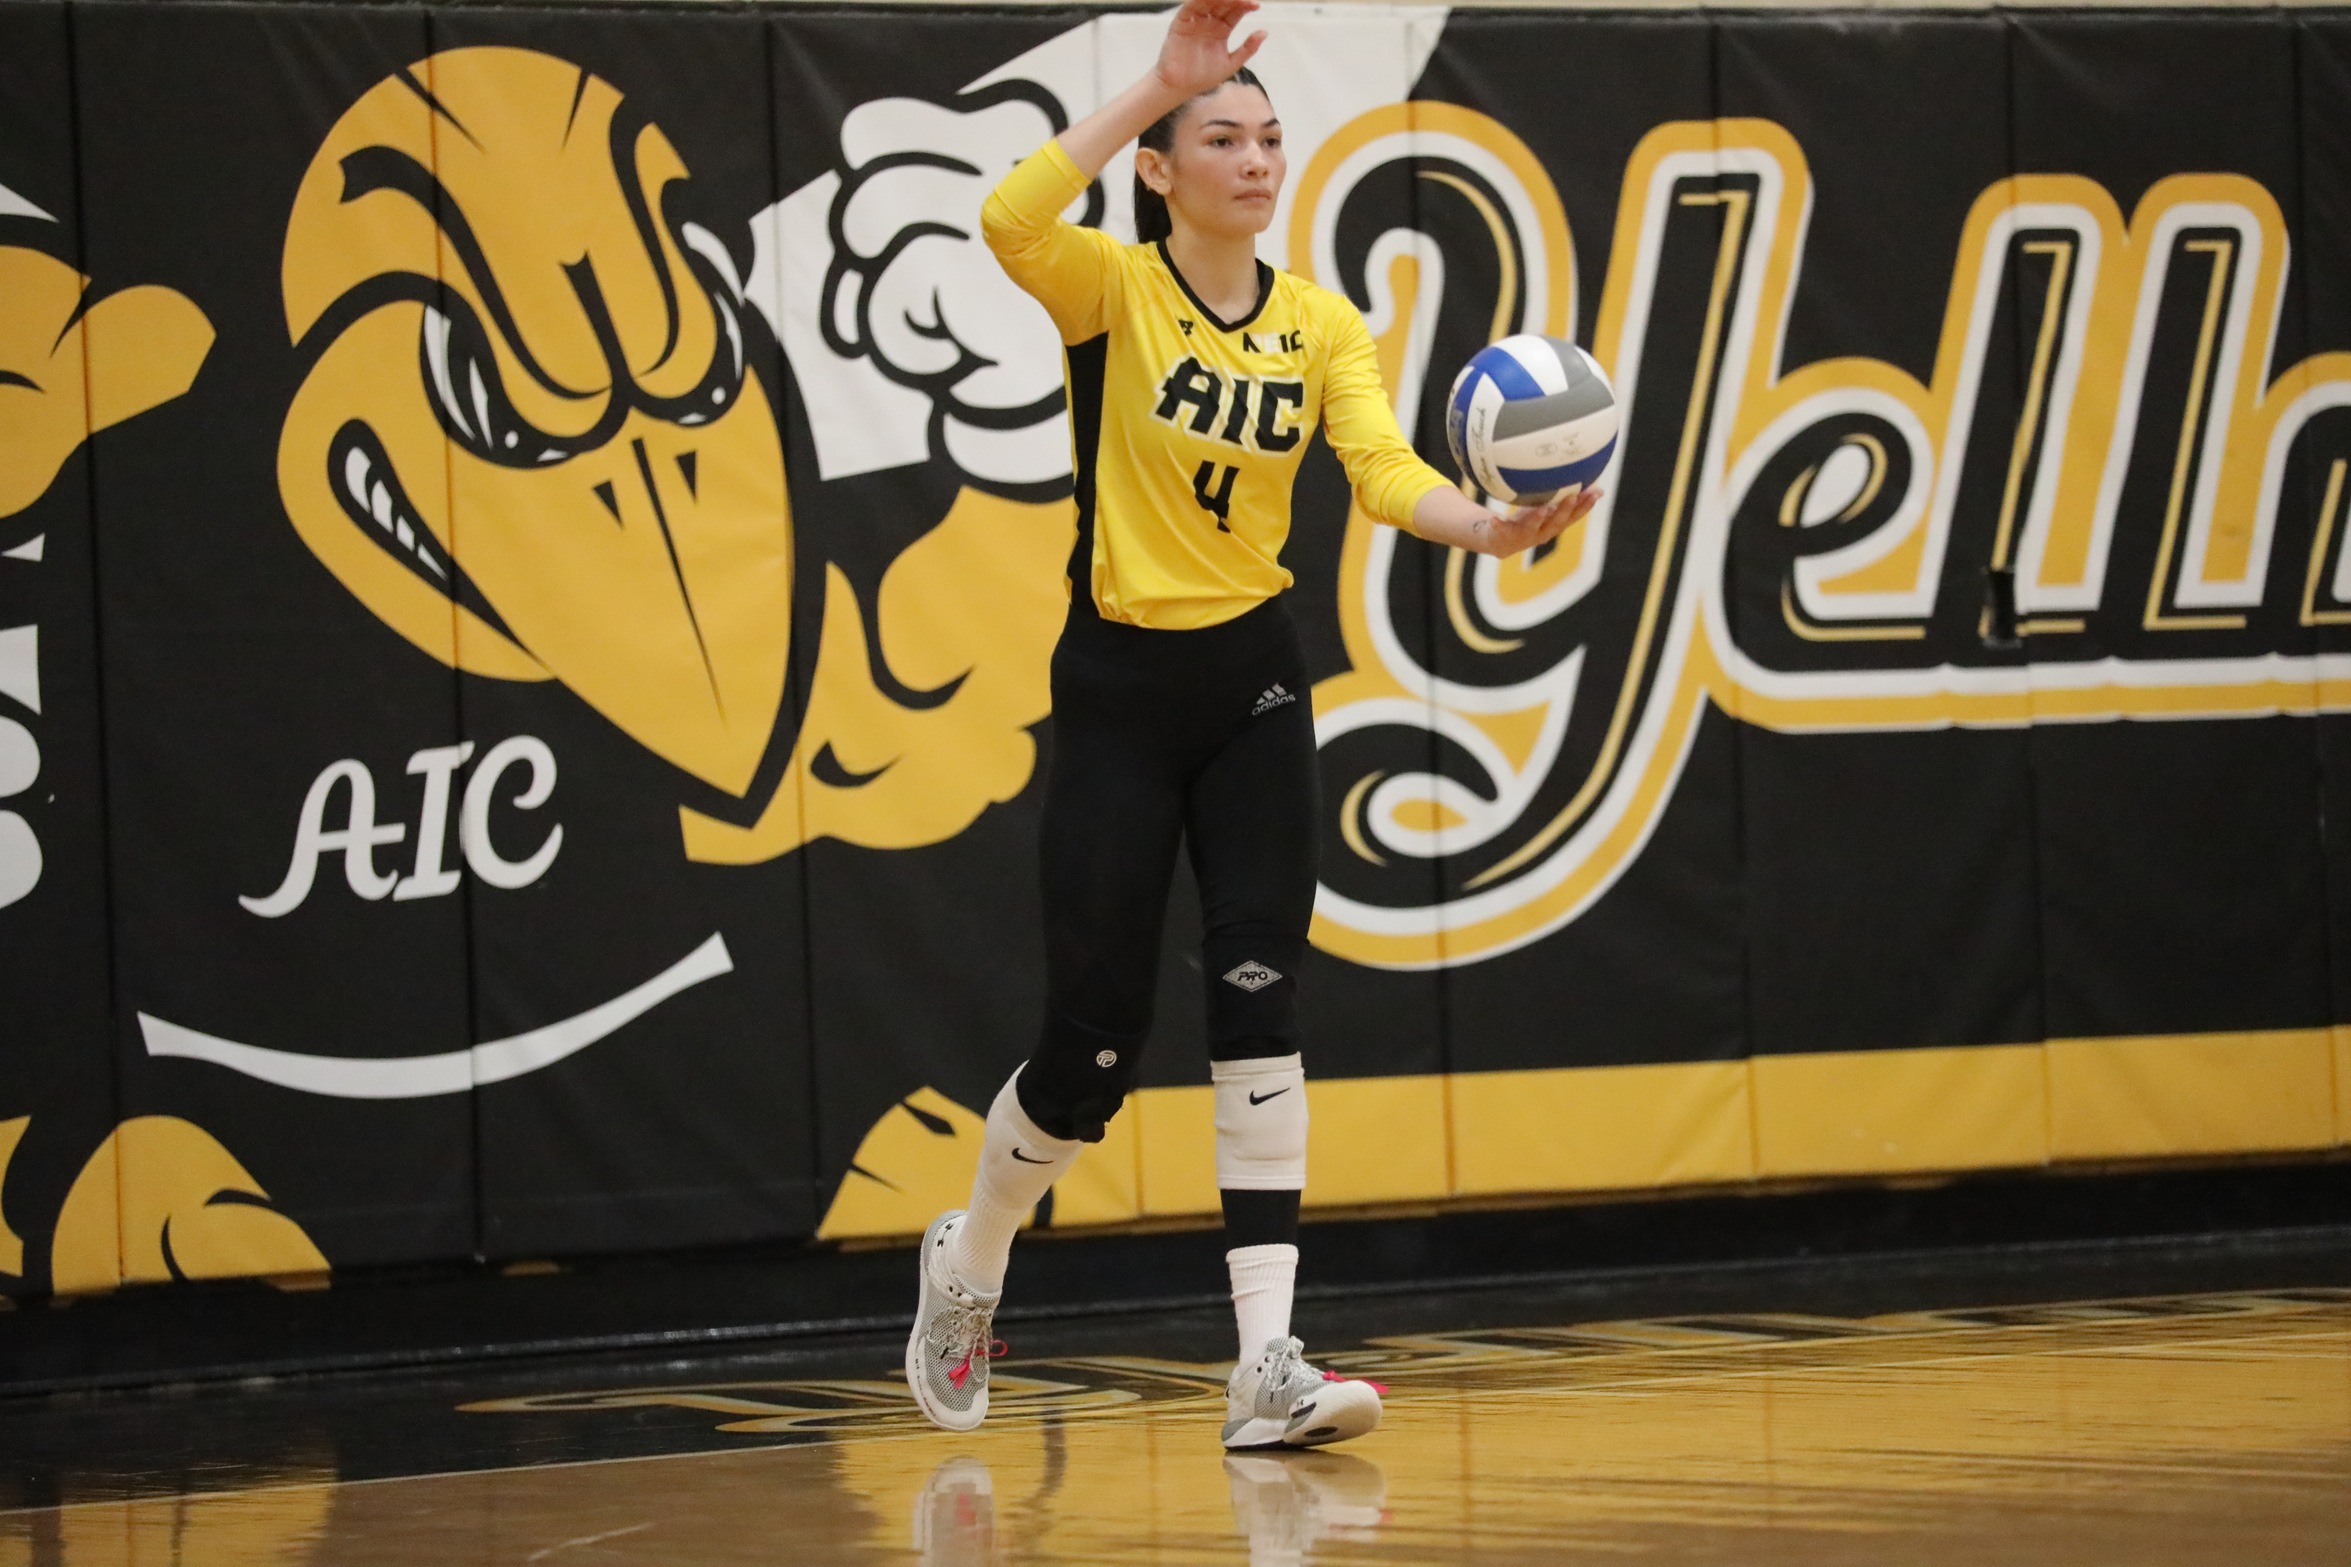 Balanced attack leads Women's Volleyball past Saint Michael's, clinches home postseason match